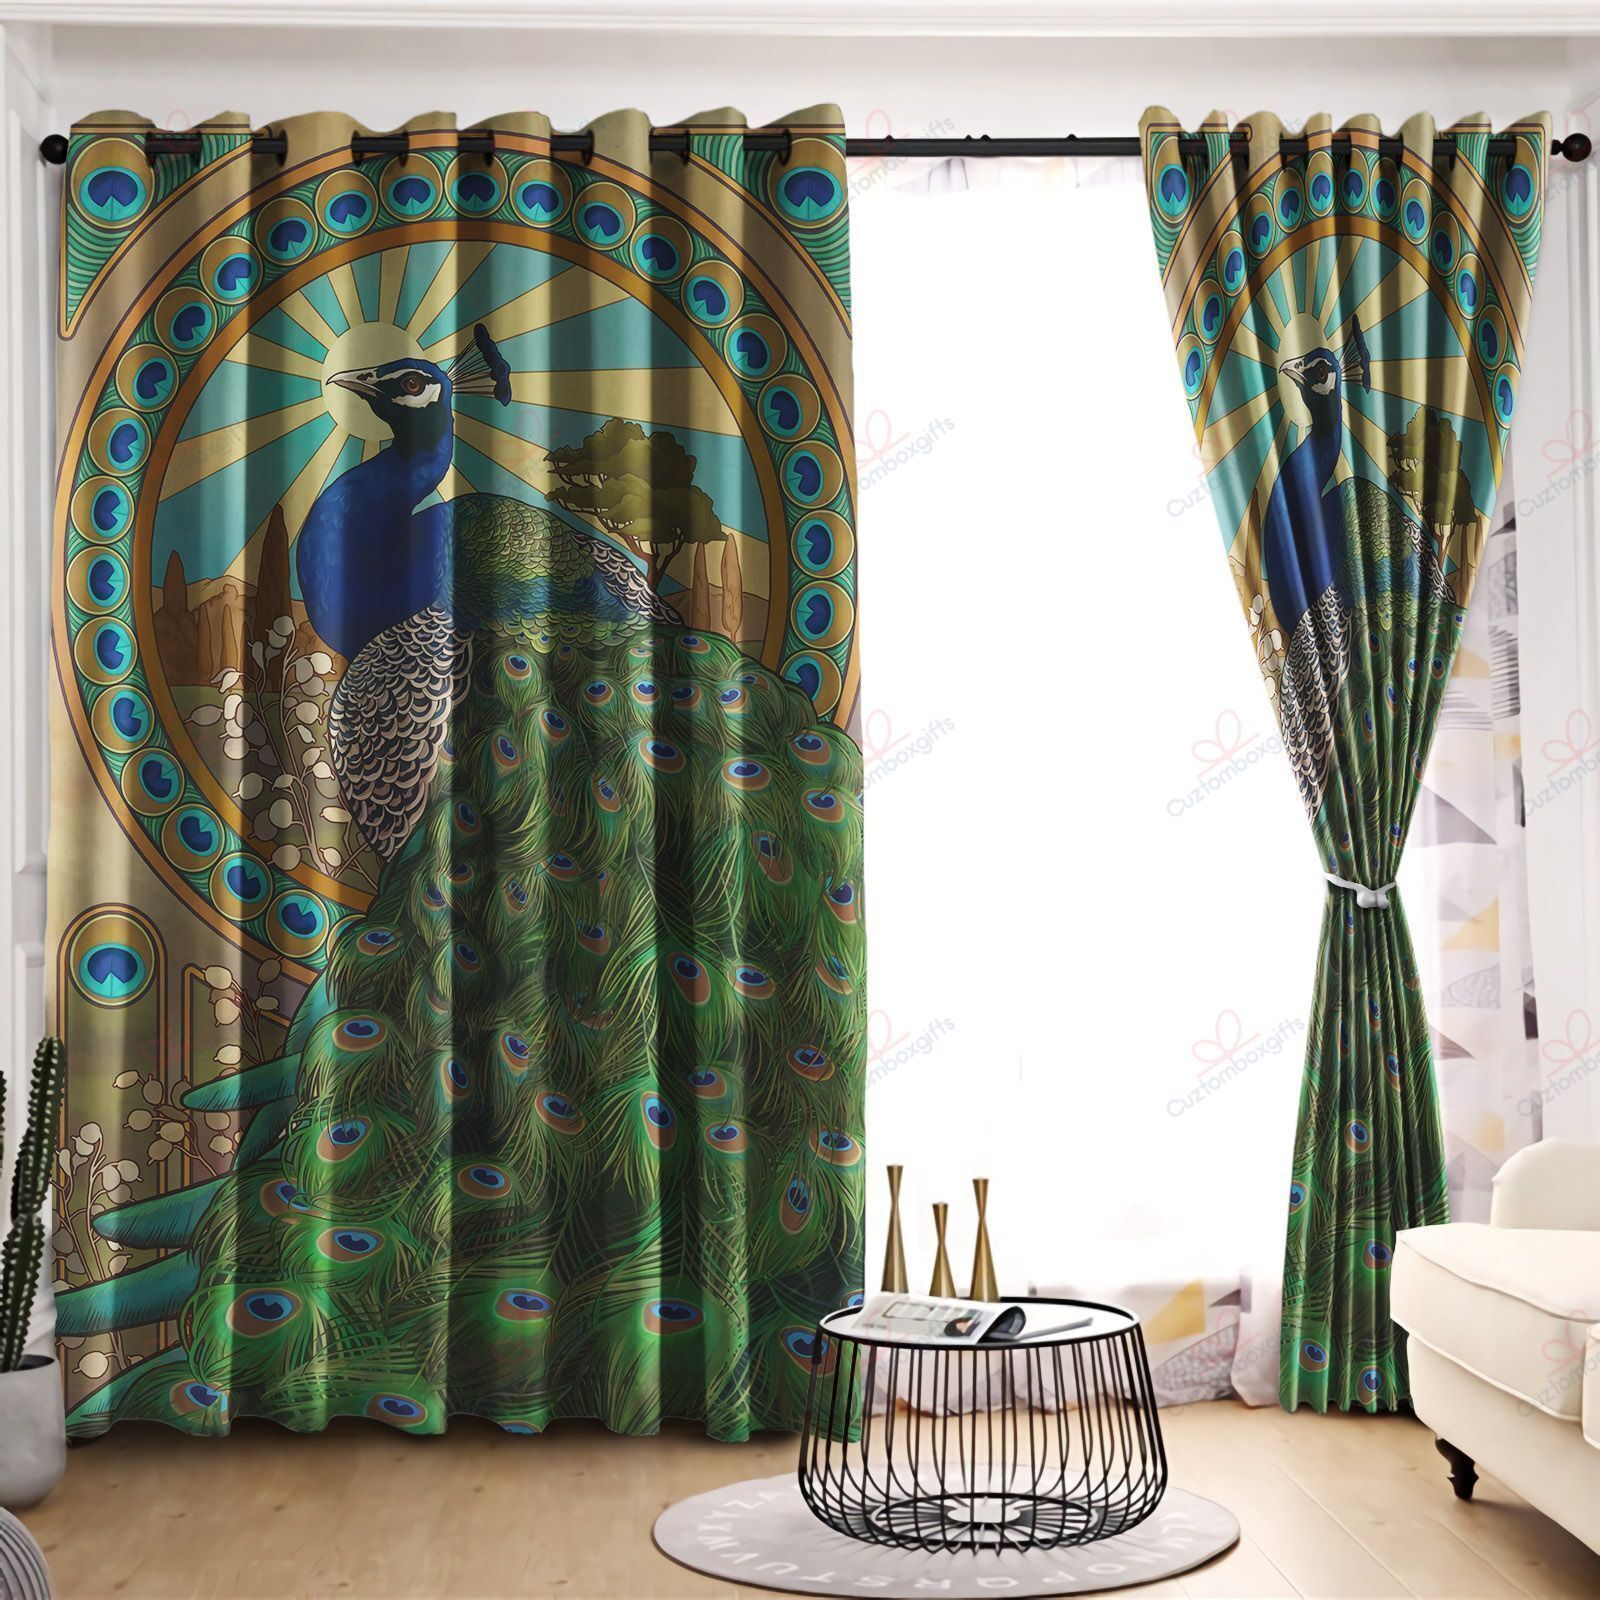 Peacock With Beautiful Tail Printed Window Curtains Home Decor